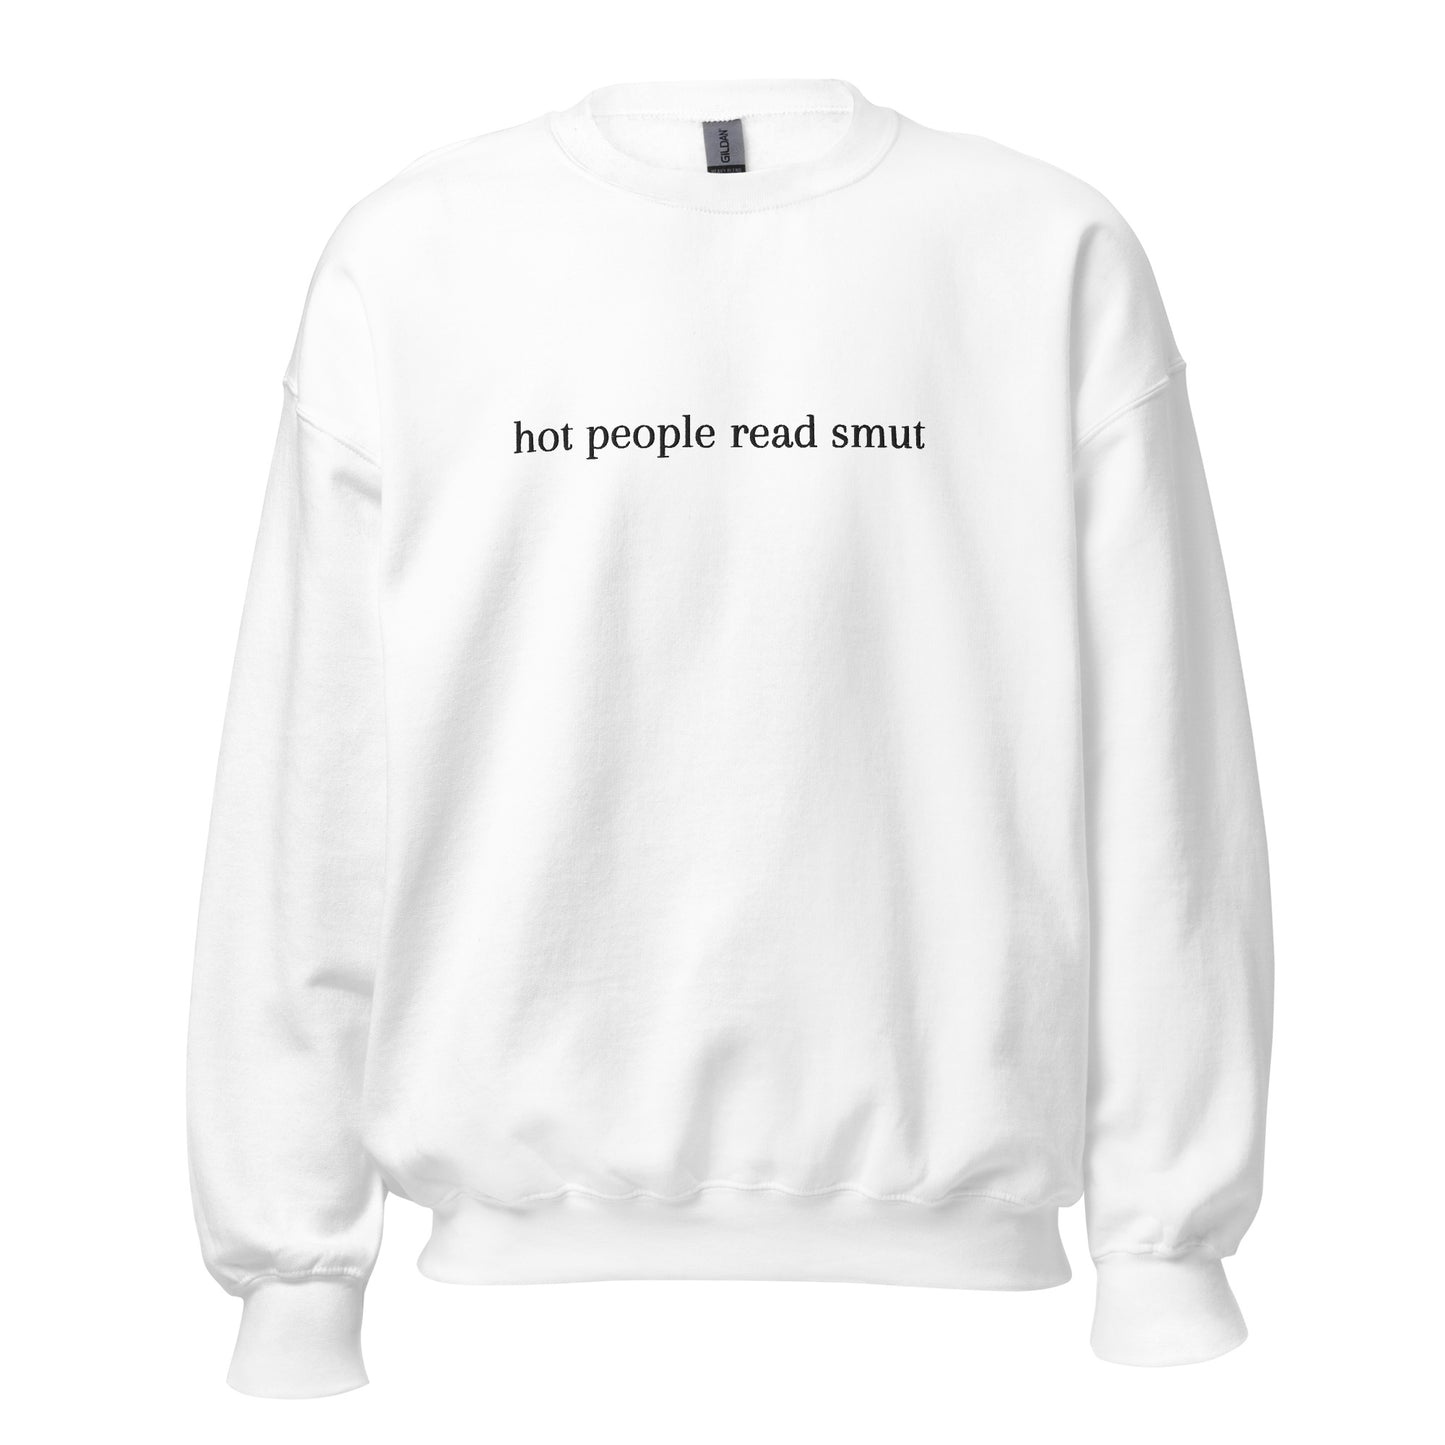 hot people read smut embroidered sweatshirt